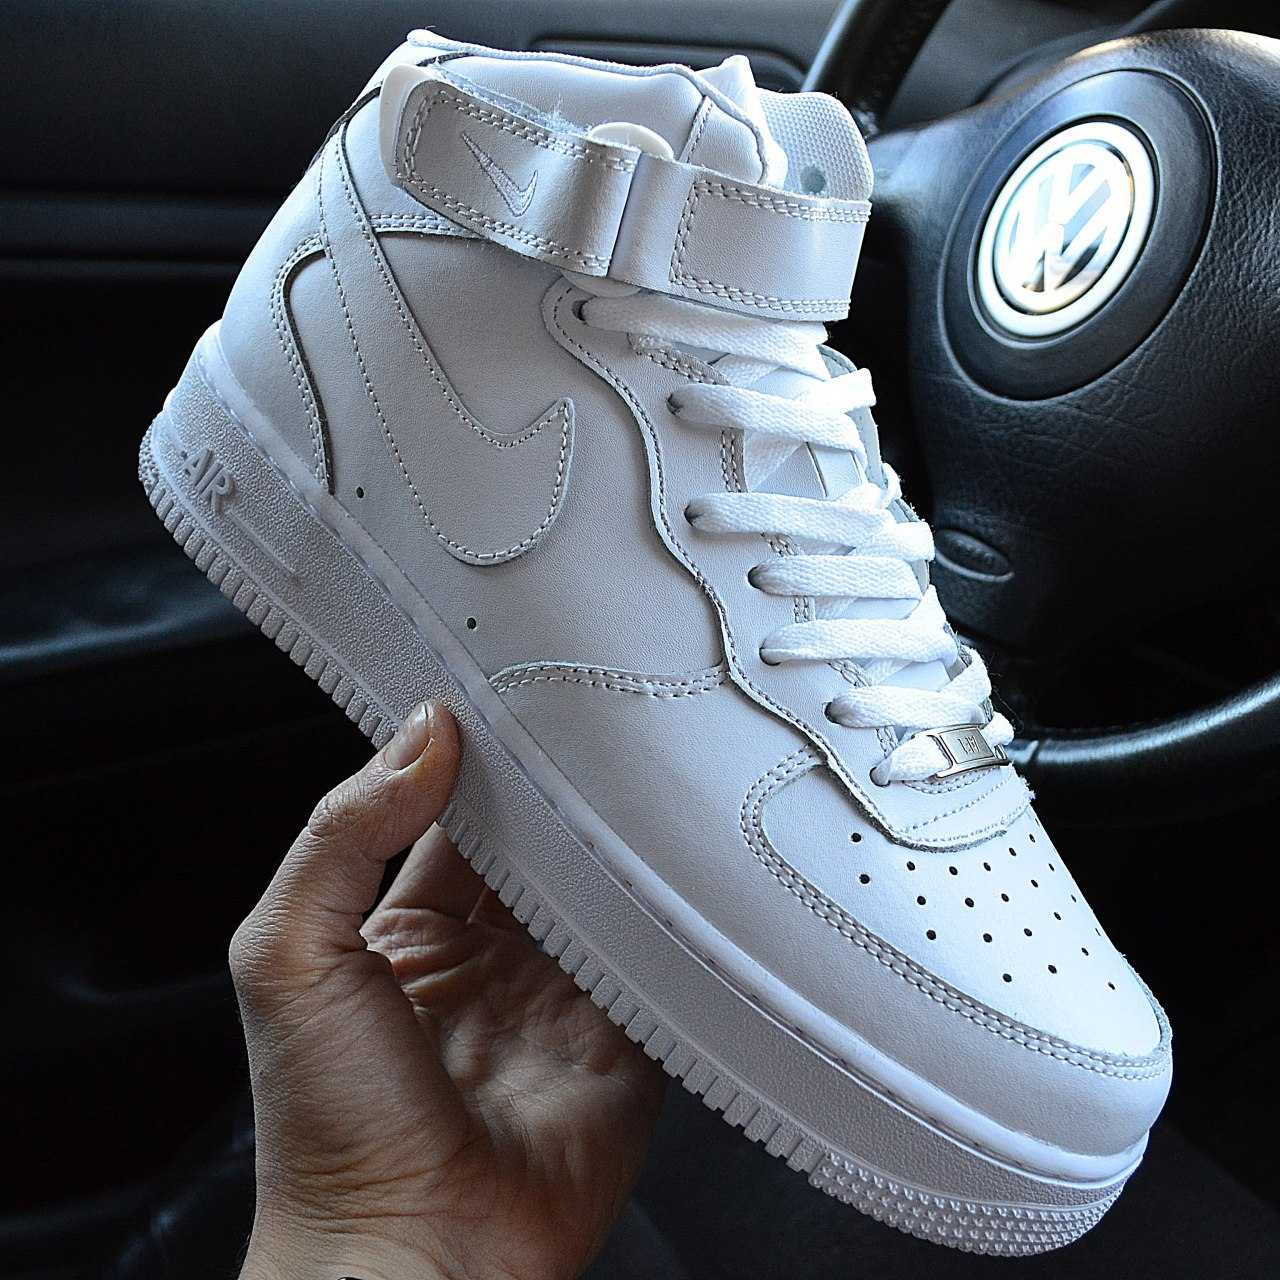 Кроссовки Nike Air force1 Mid. Nike Air Force 1 Mid 07 White. Nike Air Force 1 White. Nike Air Force 1 Mid White.